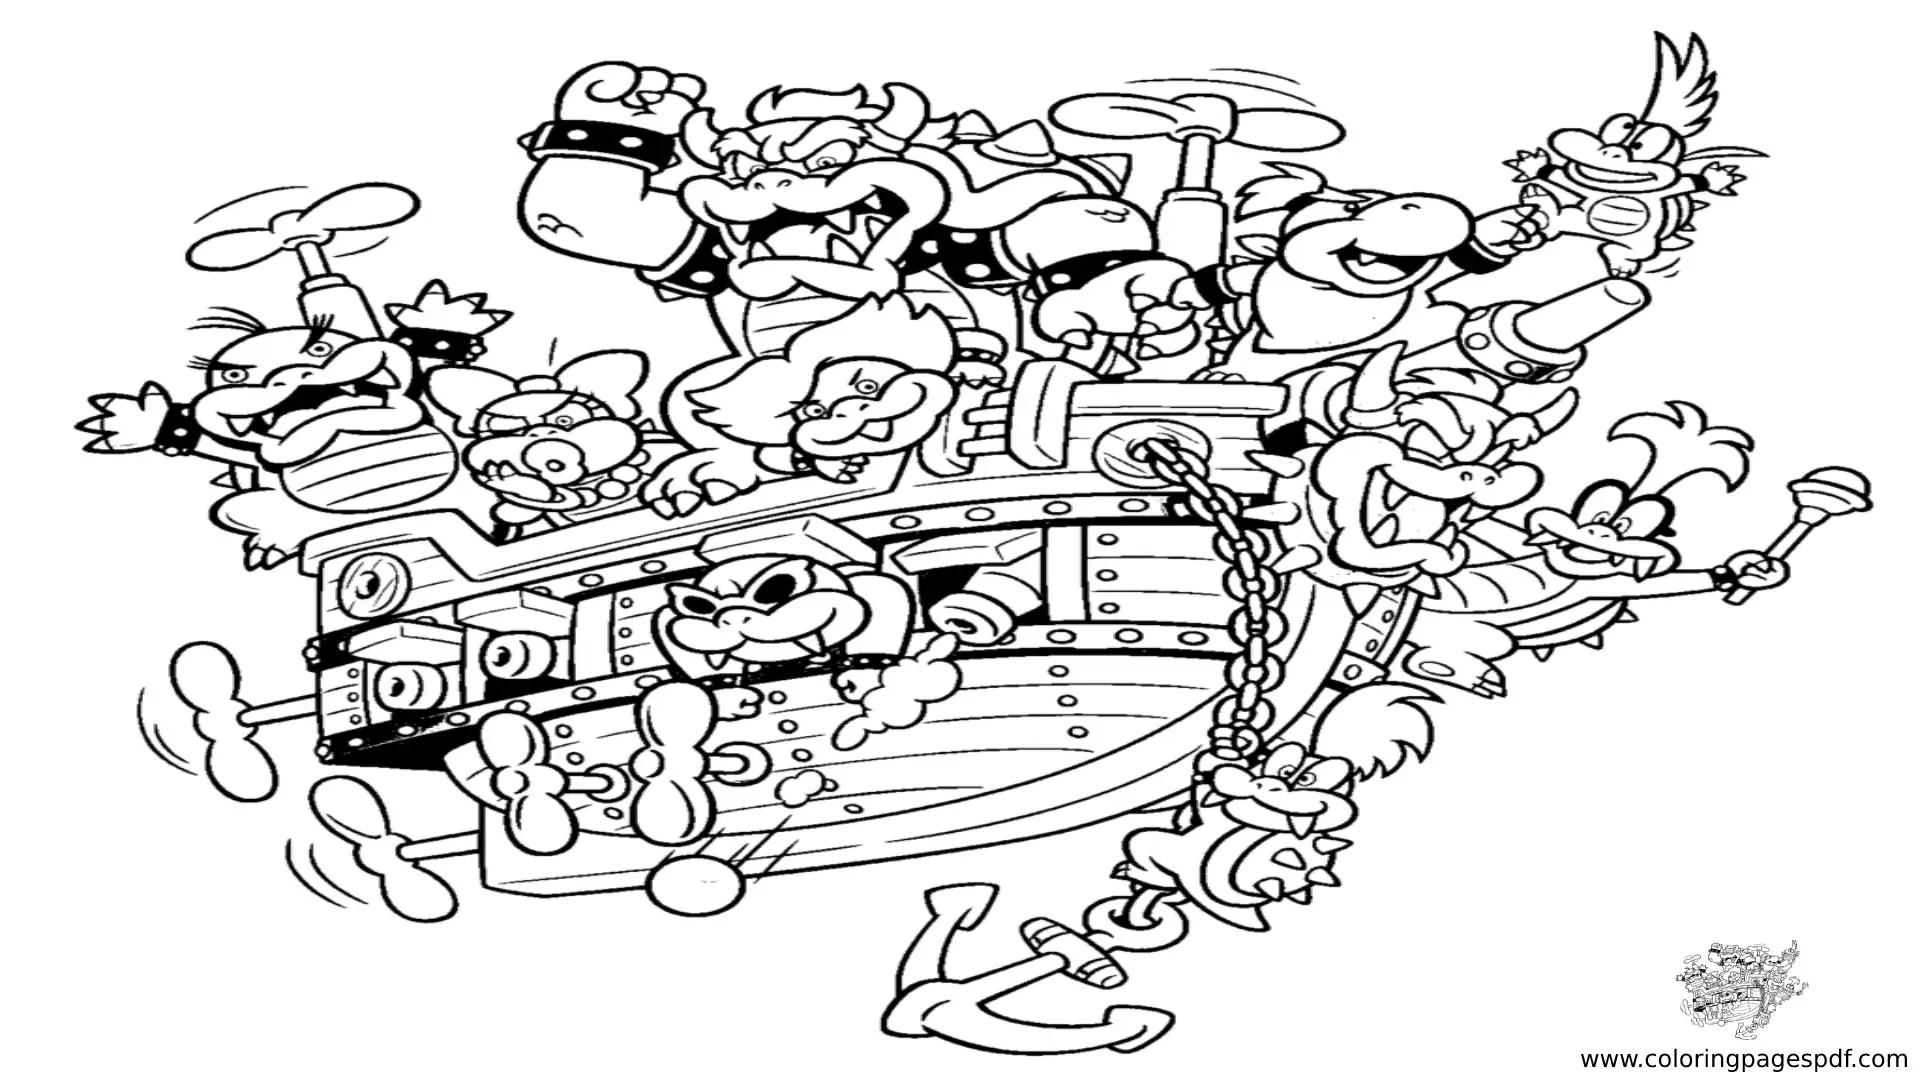 Coloring Pages Of Bowser And Turtles On A Boat